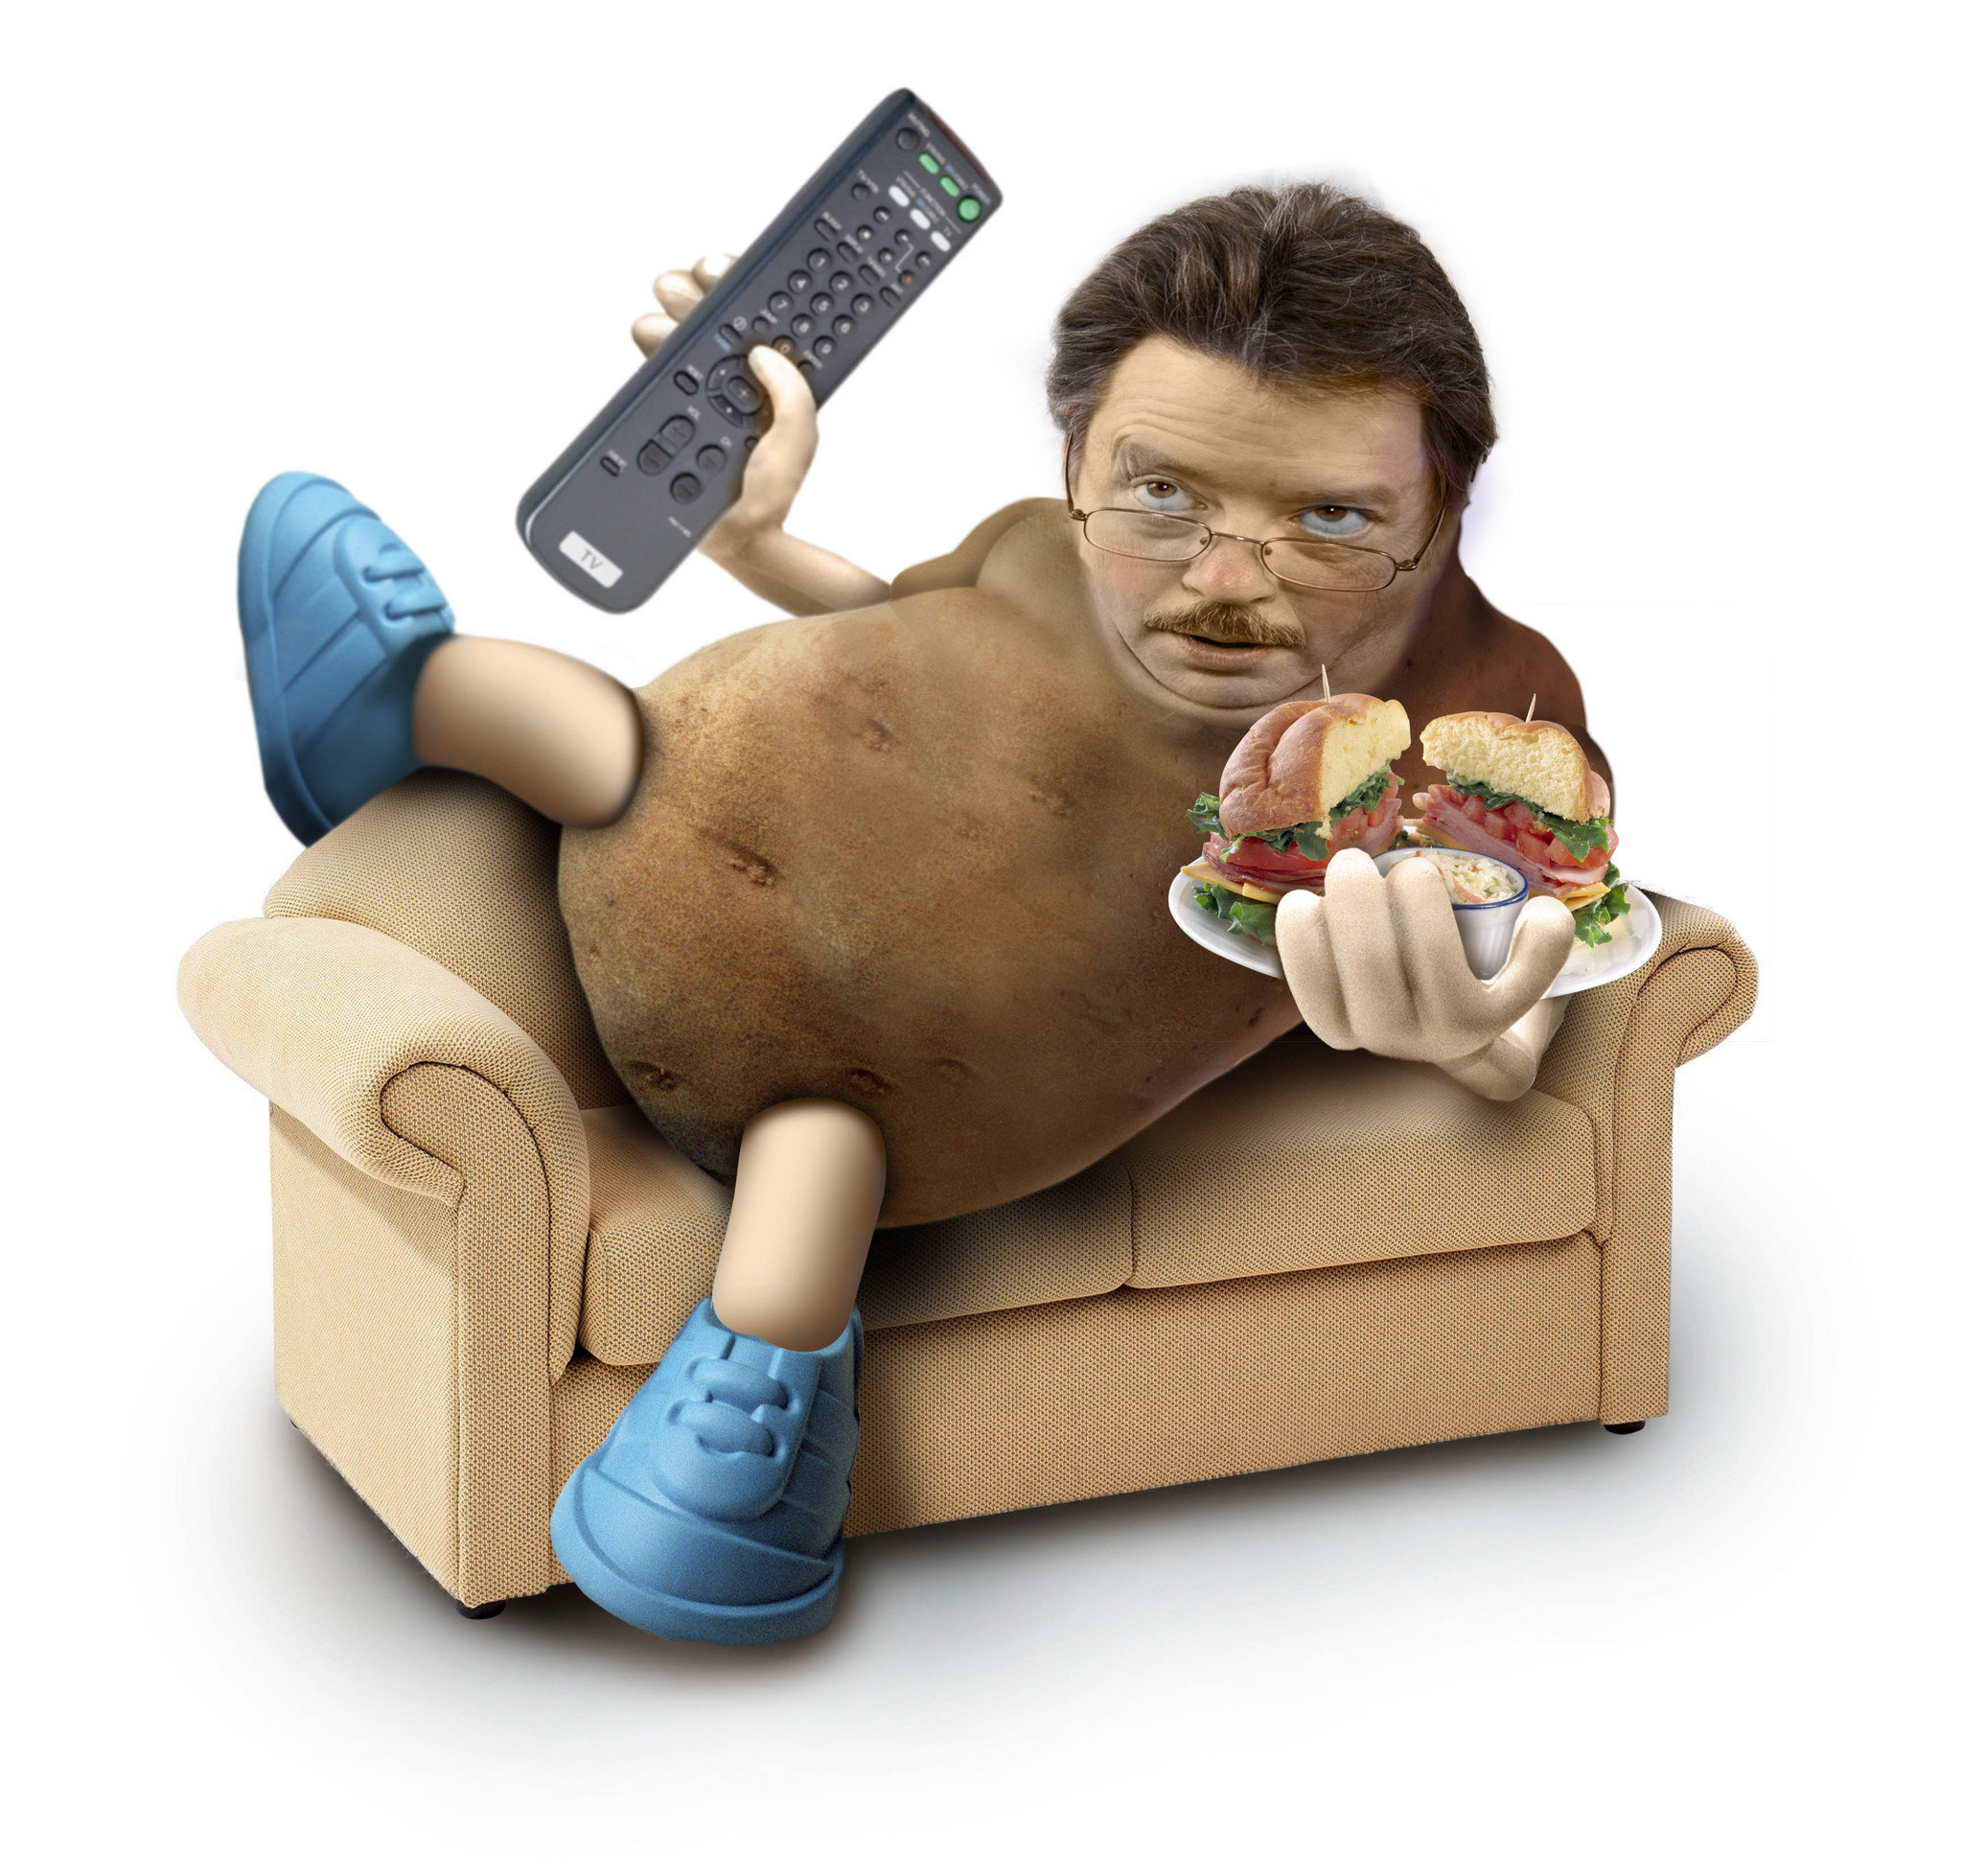 Couch potatoes pictures to create couch potatoes ecards, custom profiles, b...